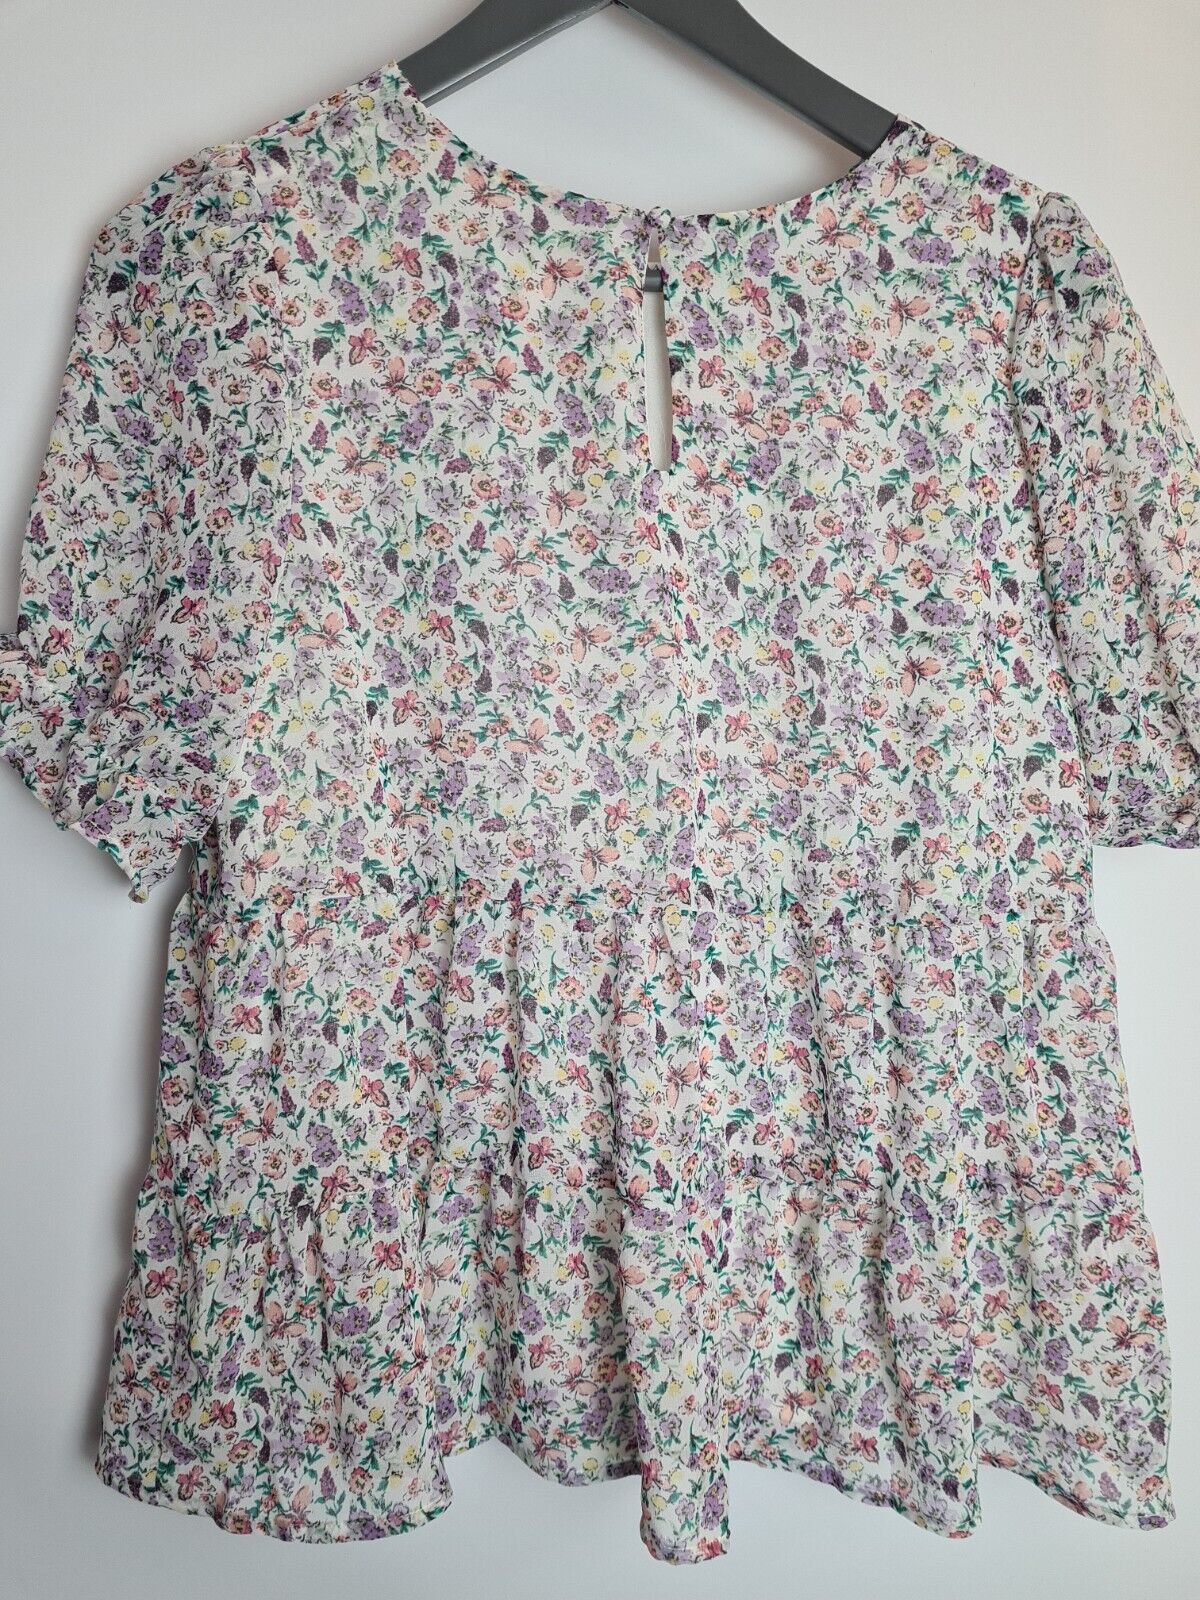 Apricot Floral Ruffle Tiered Top Size 10 **** V80